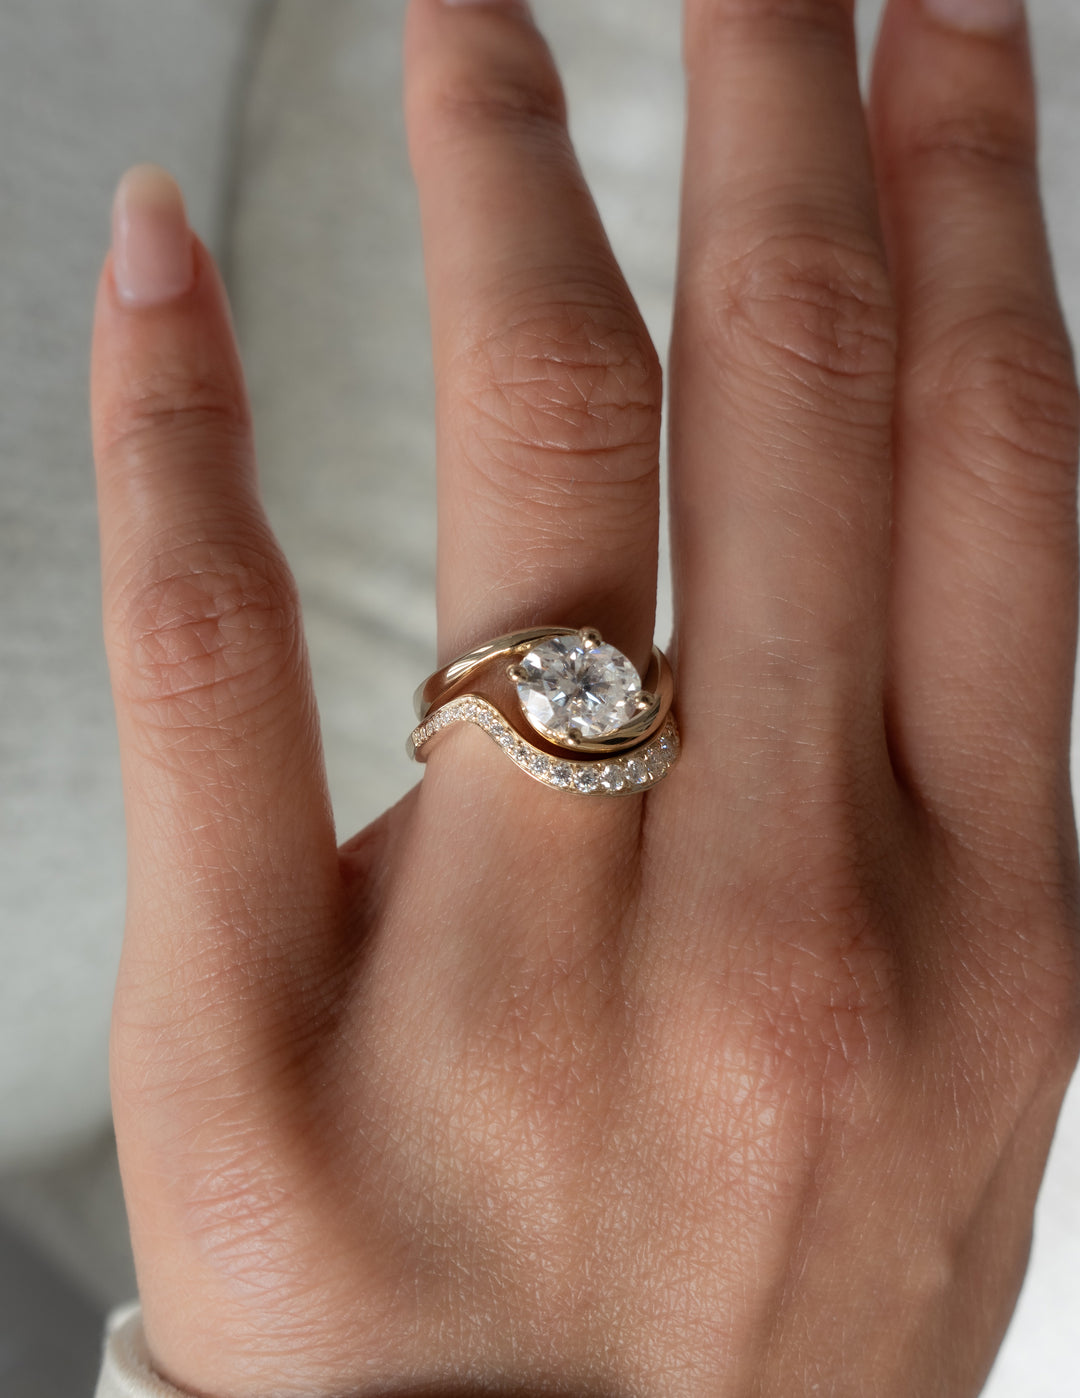 Cadette Oval Rapture engagement ring set with band. Oval Ocean Inspired Engagement solitaire Ring with band. Oval Nature Inspired Engagement solitaire Ring with band.